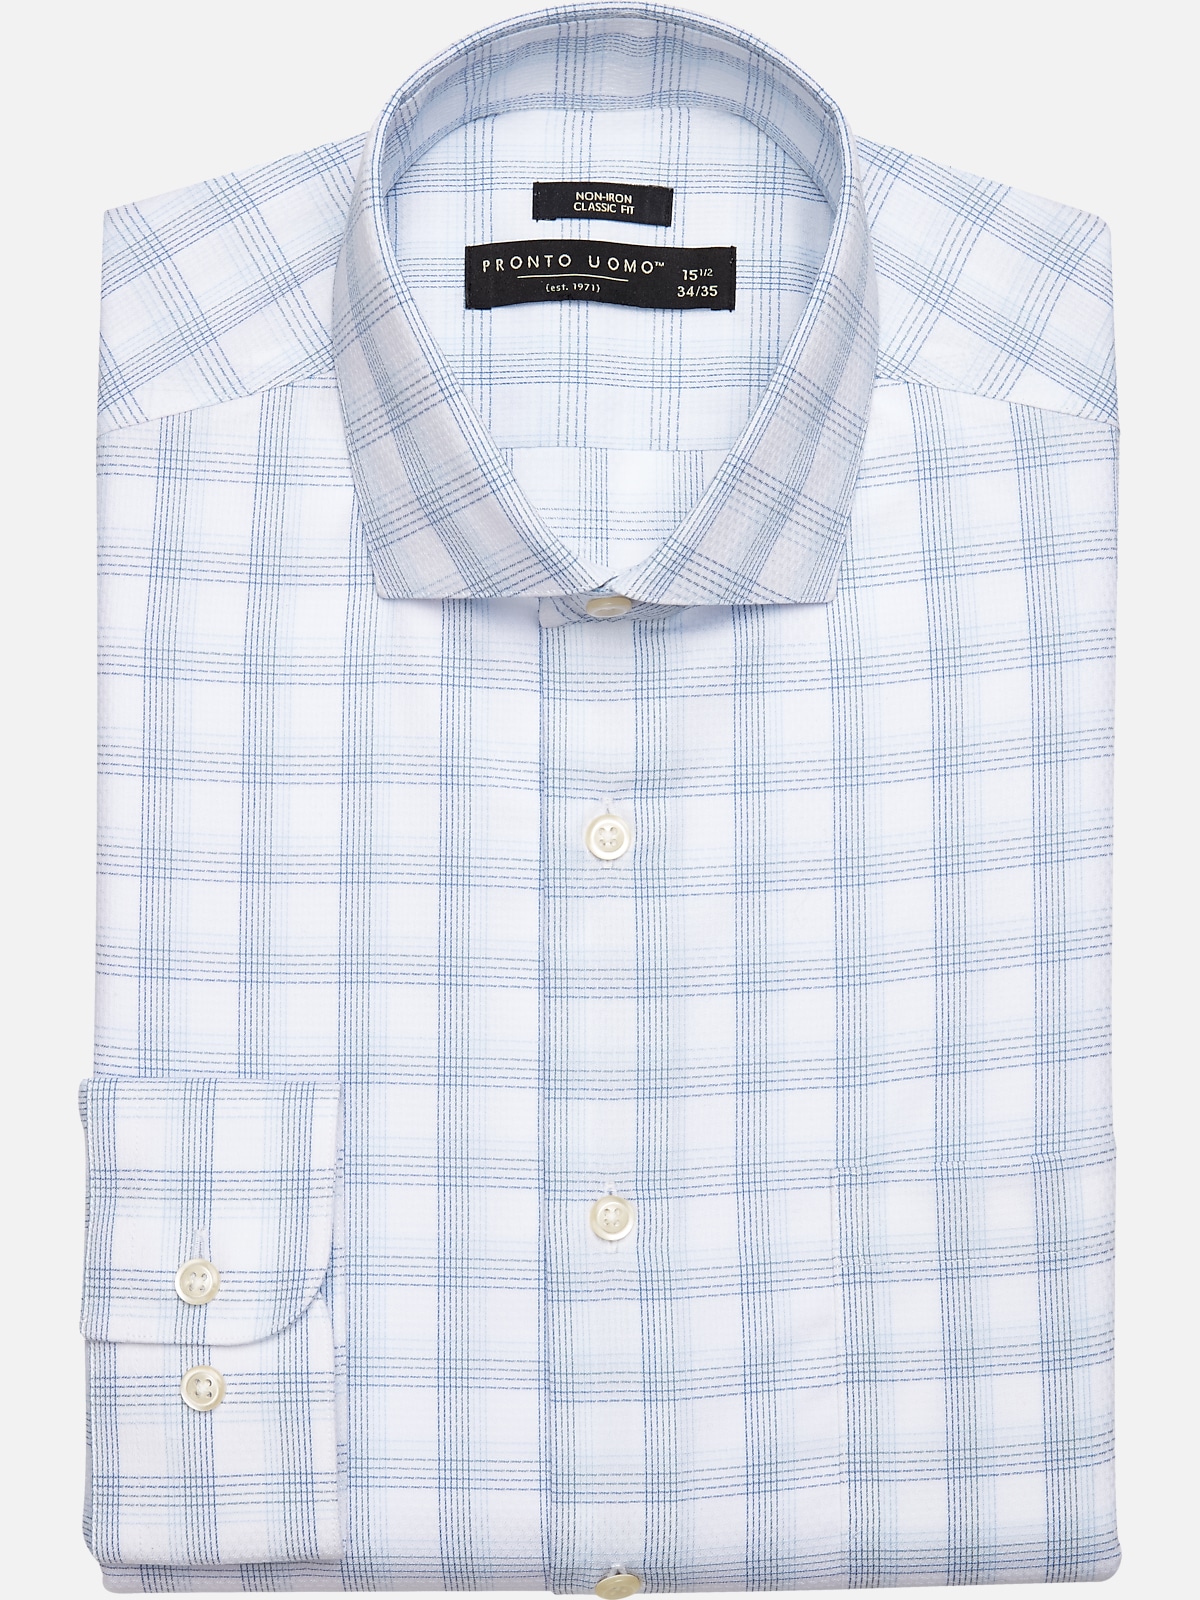 Pronto Uomo Classic Fit Dress Shirt Check | All Clearance $39.99| Men's ...